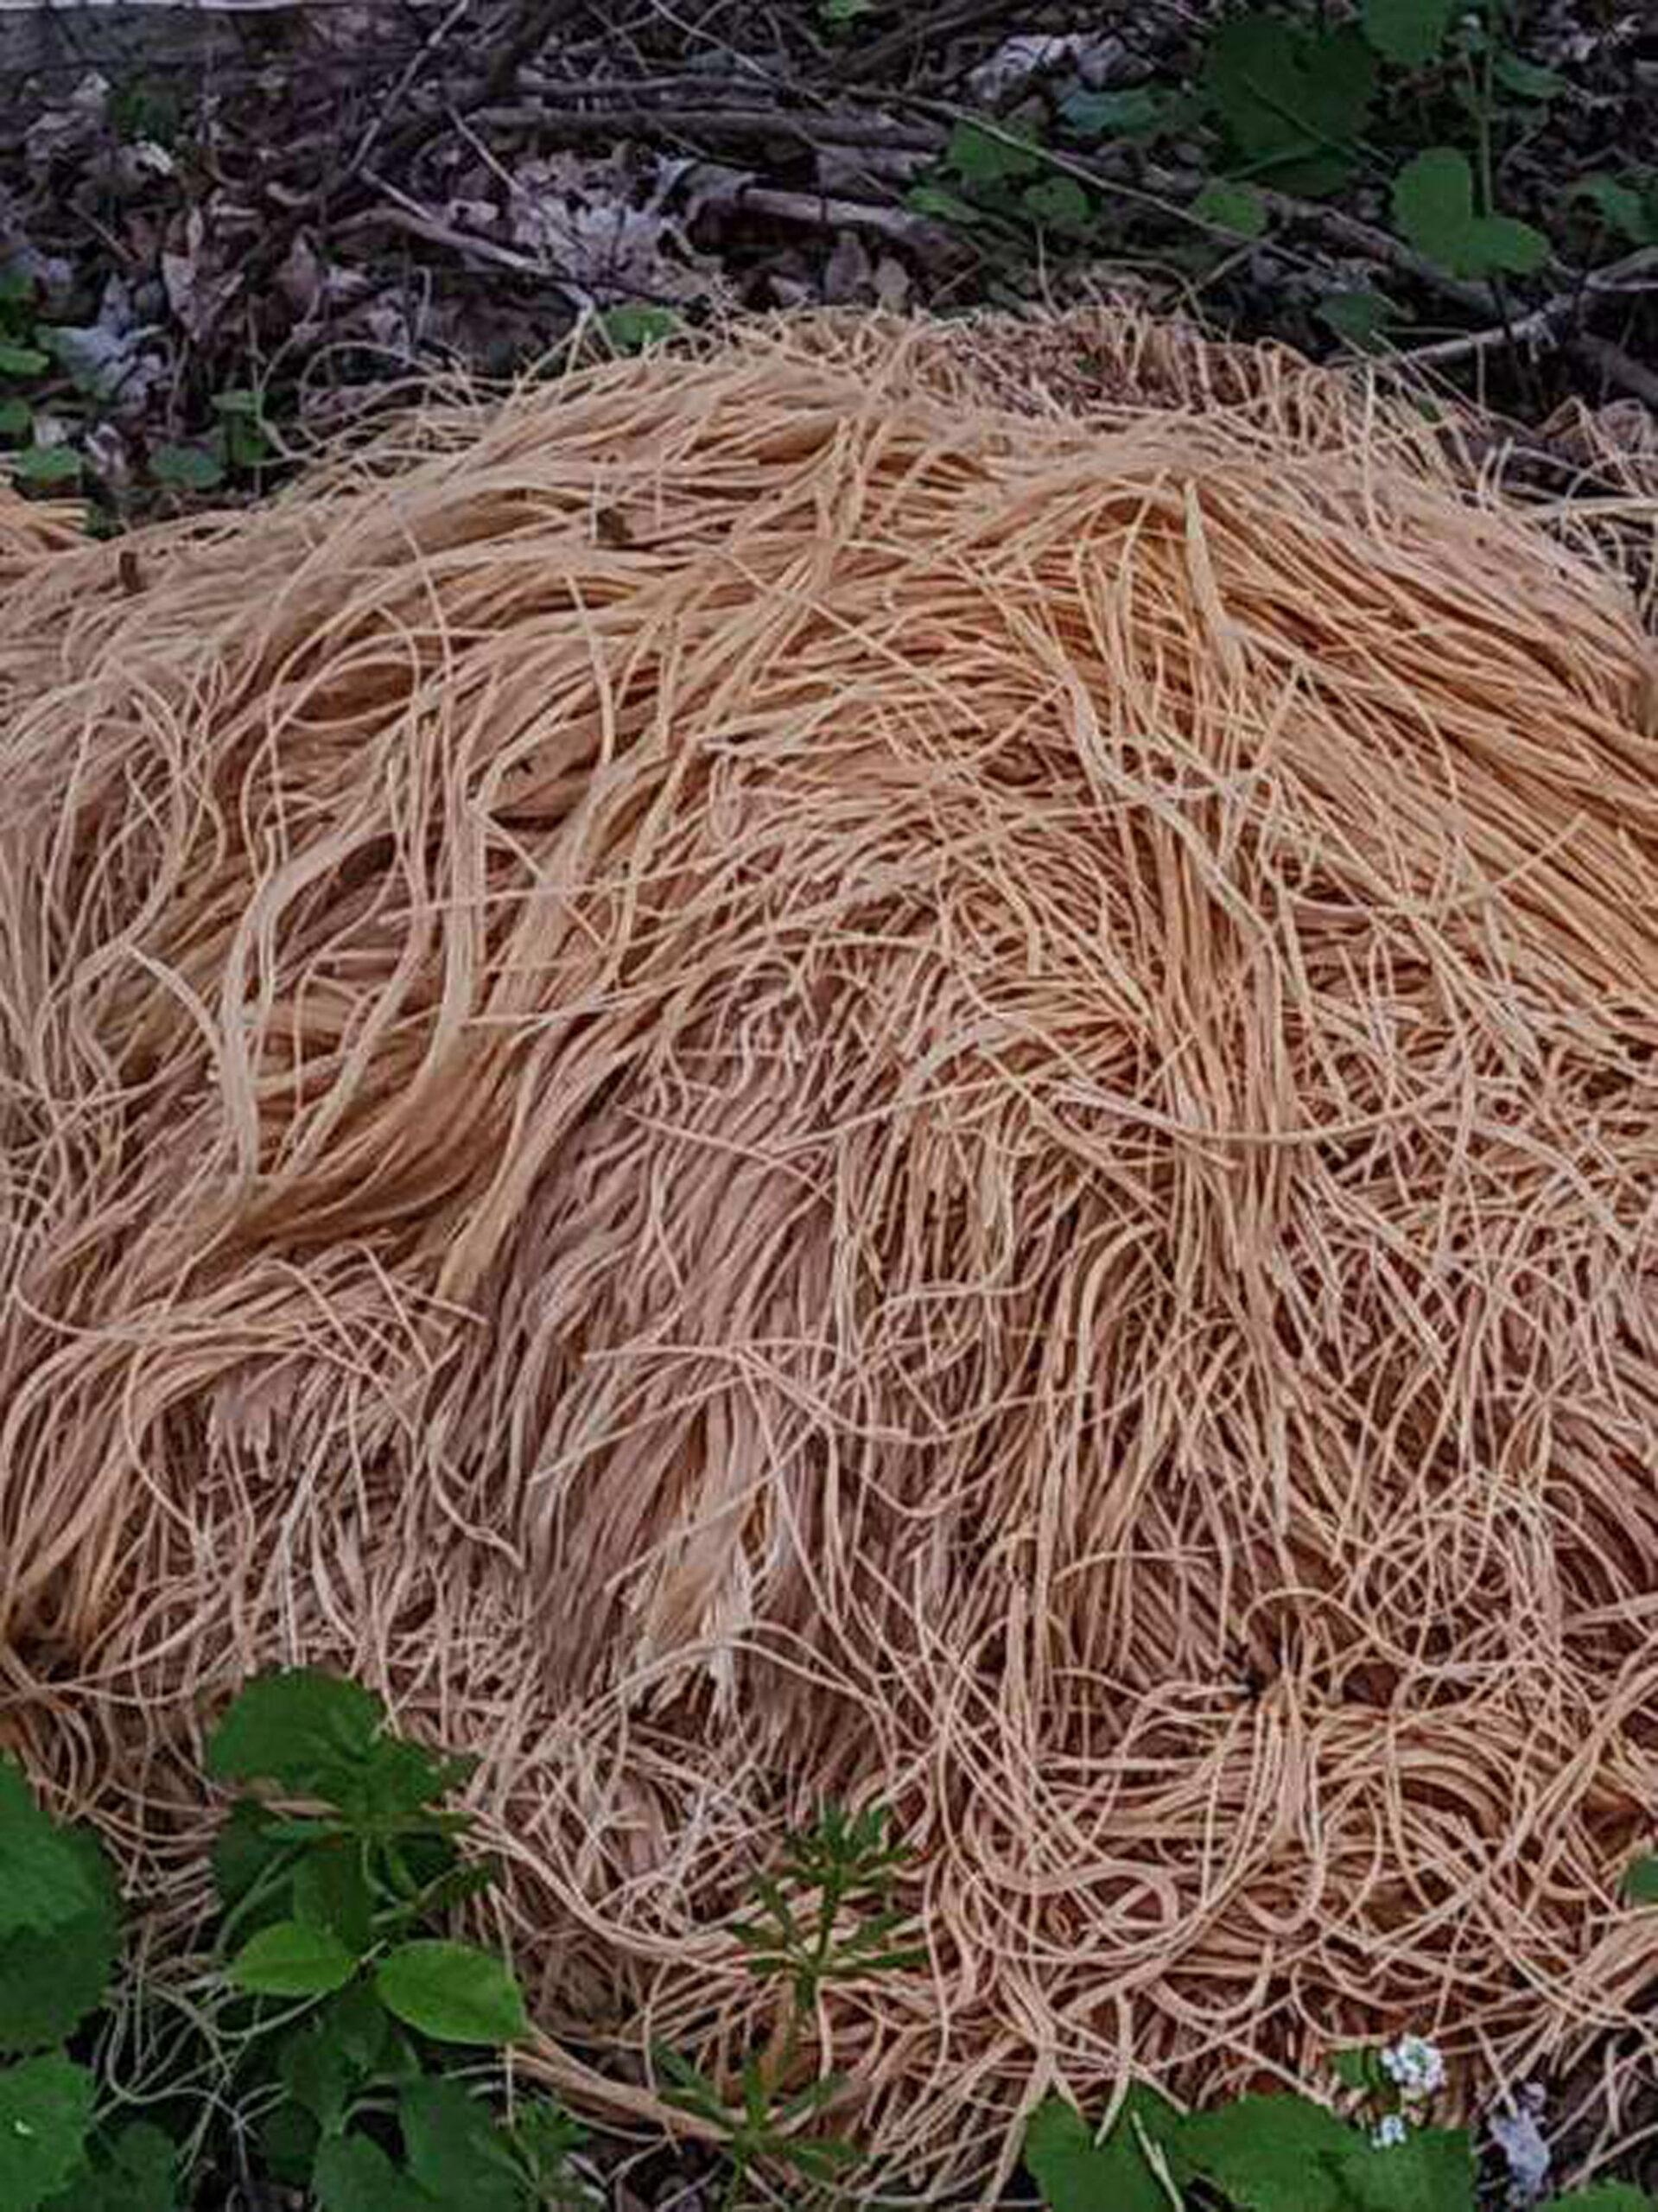 Mountains of cooked pasta mysteriously dumped in US town